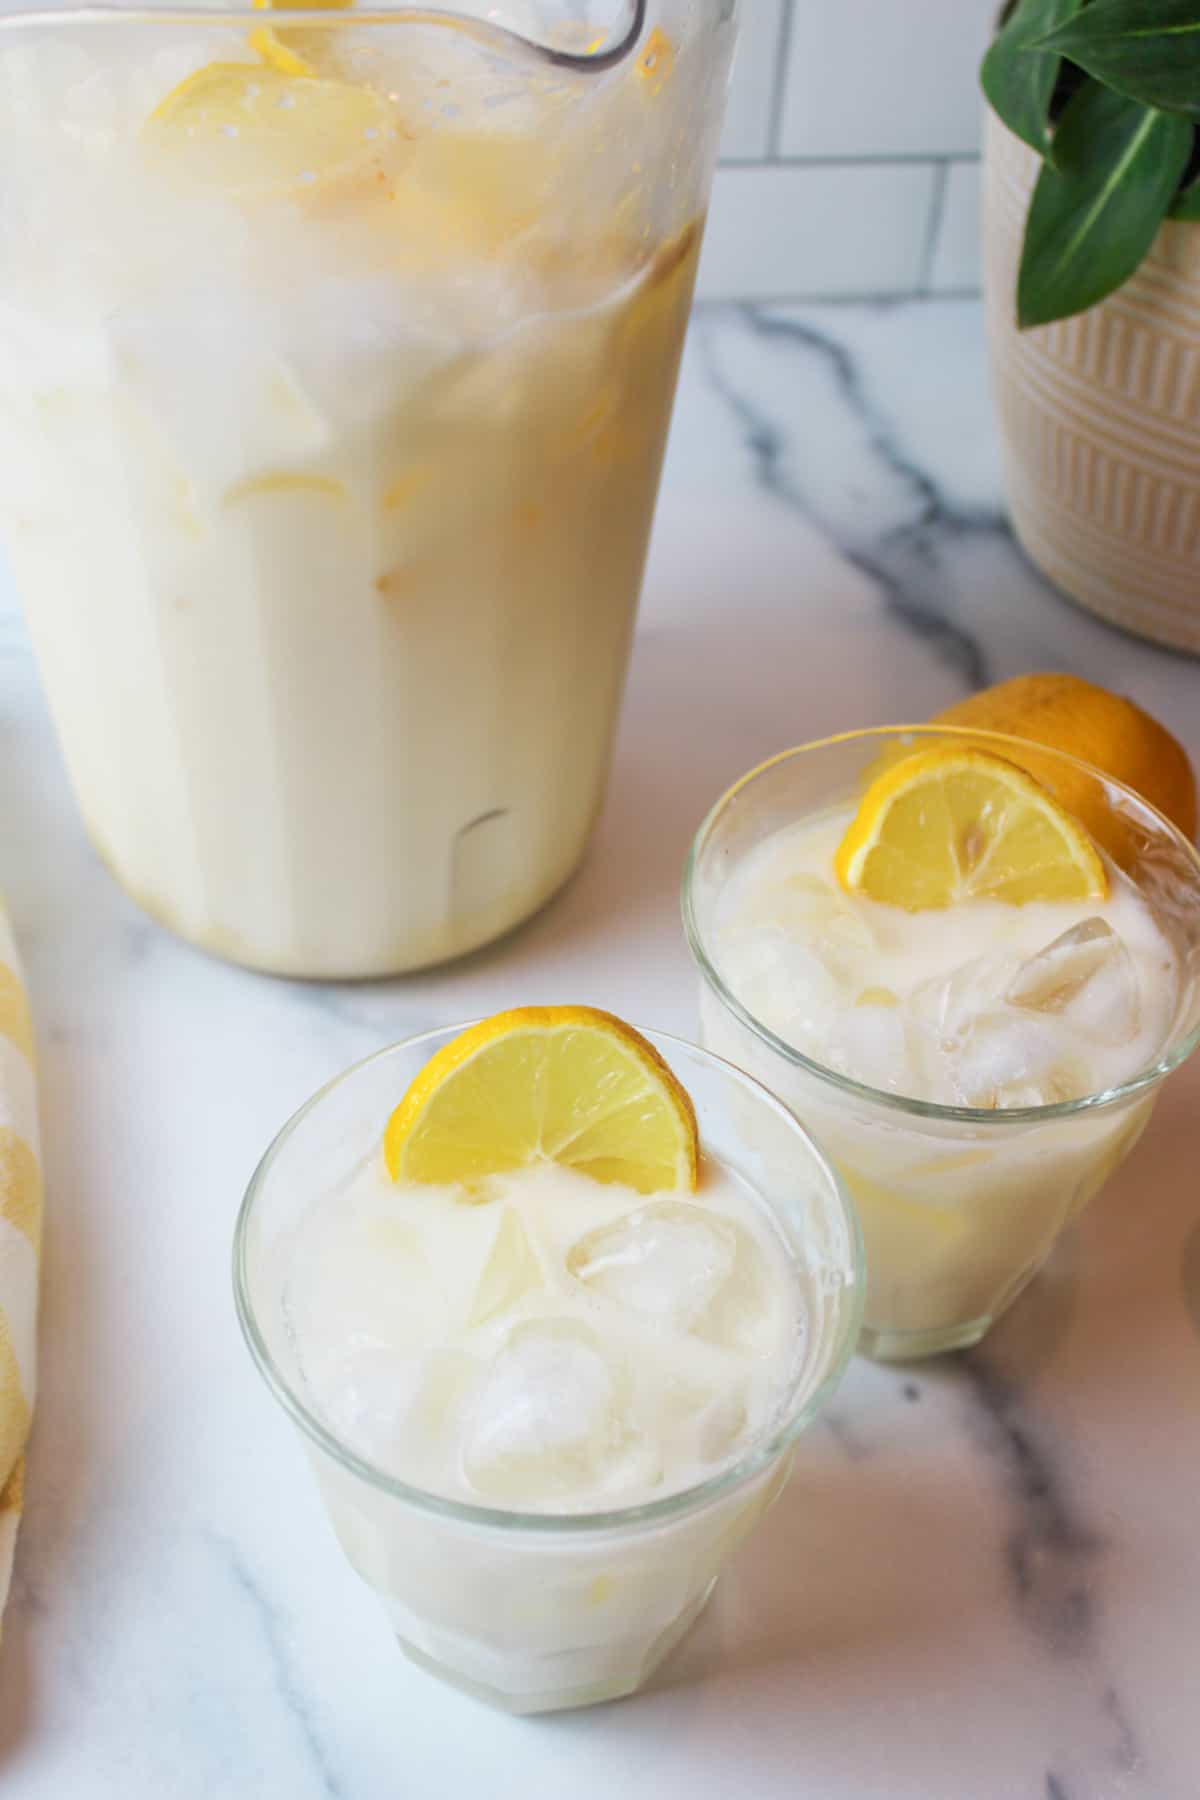 two glasses full of creamy lemonade with ice and lemon slices.